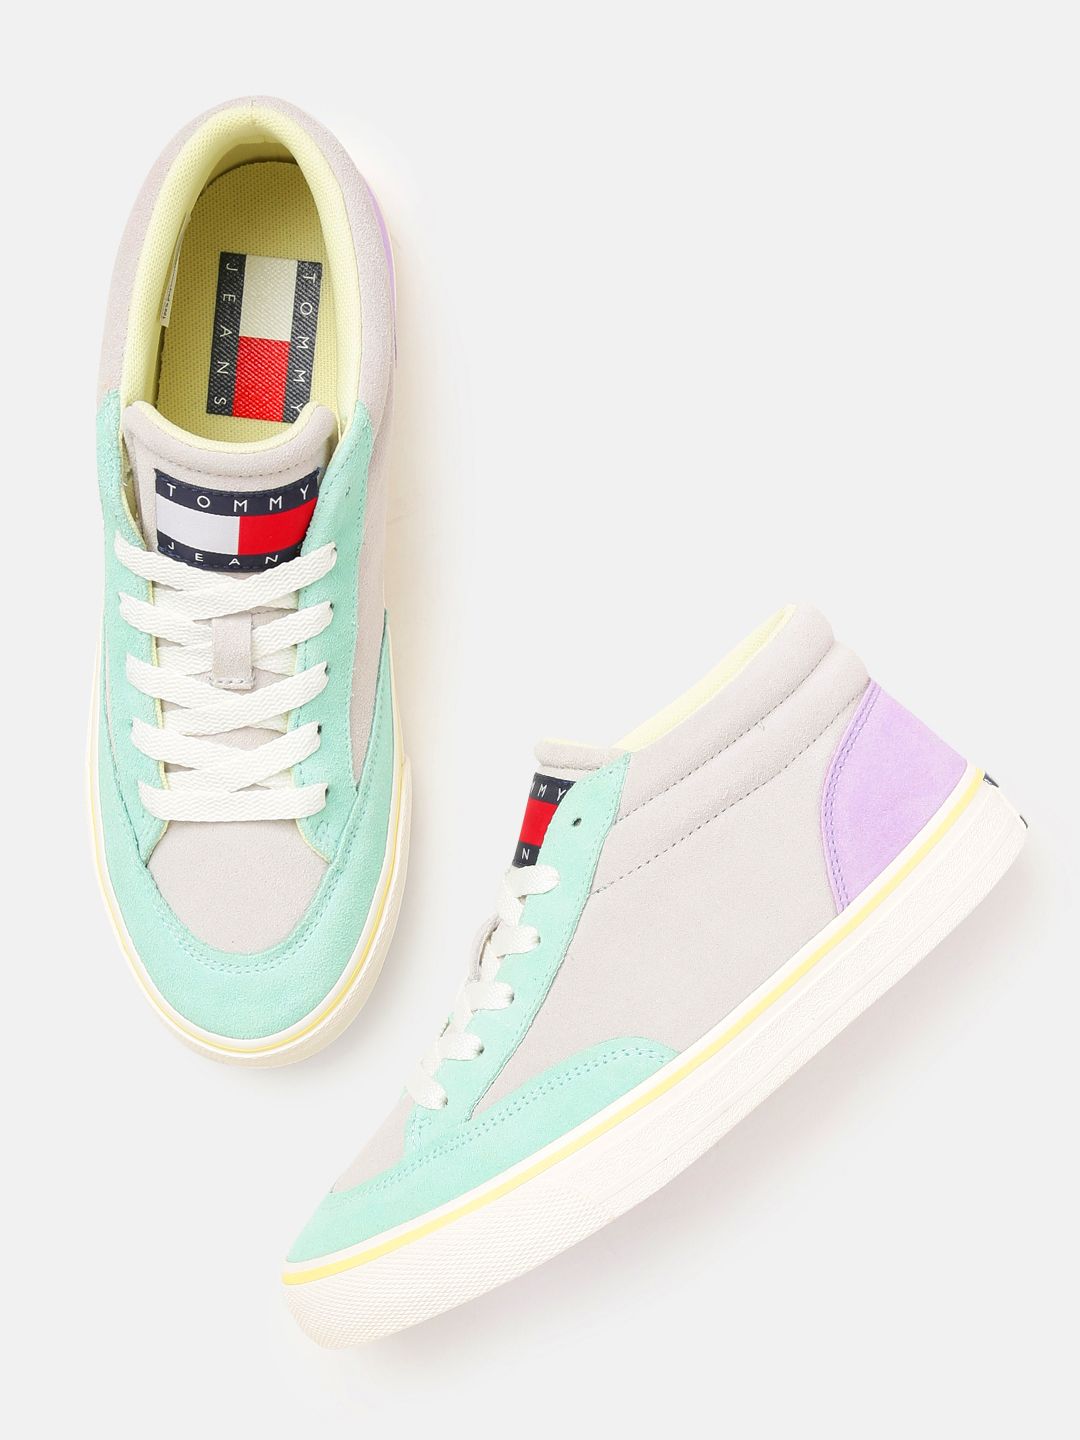 Tommy Hilfiger Women Grey & Sea Green Colourblocked Skate Varsity Suede Mid-Top Sneakers Price in India